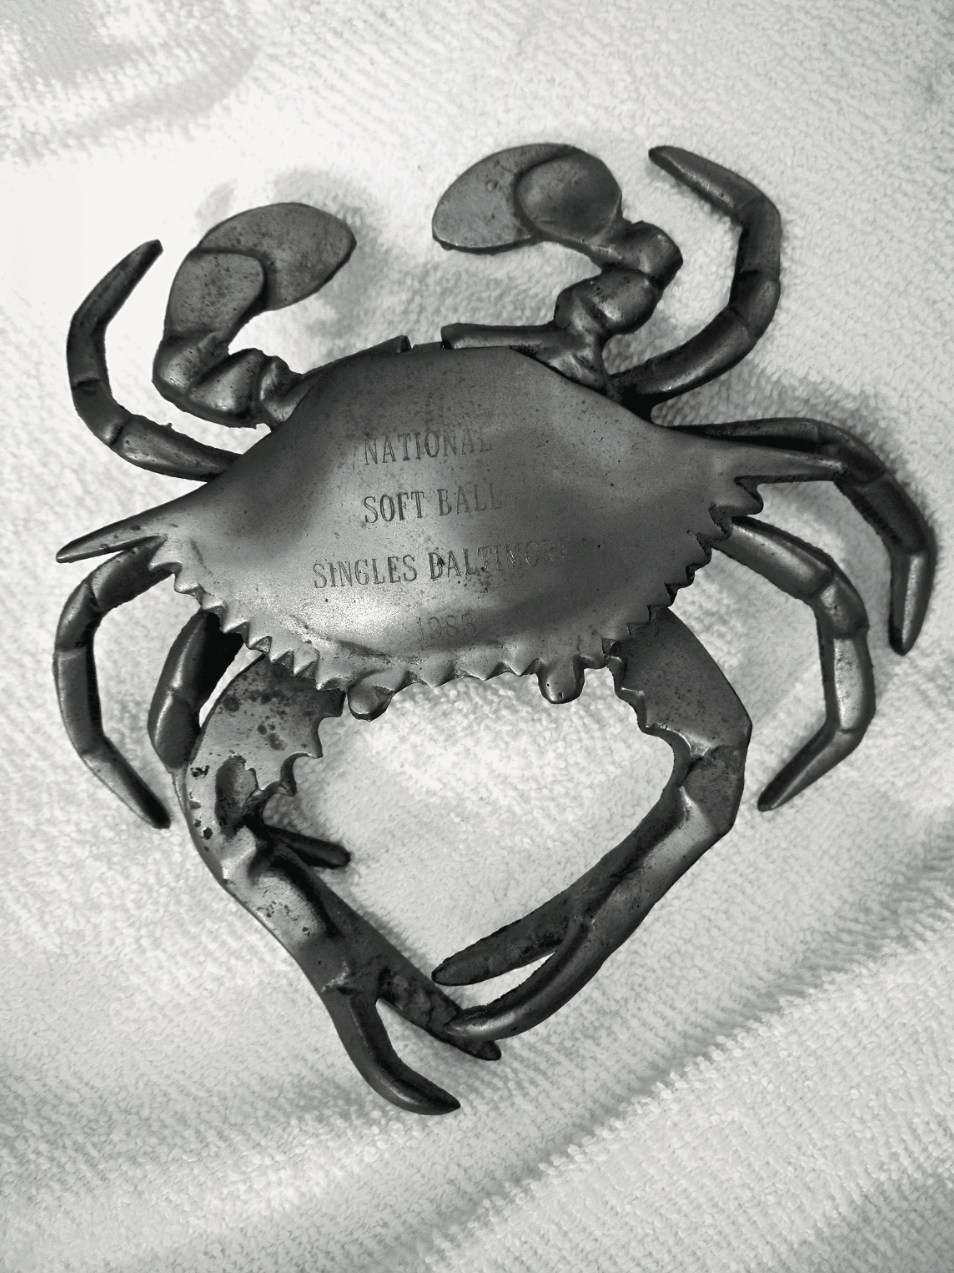 True to the Baltimore delicacy, the 1983 tournament gifts were replicas of the soft-shell crab.